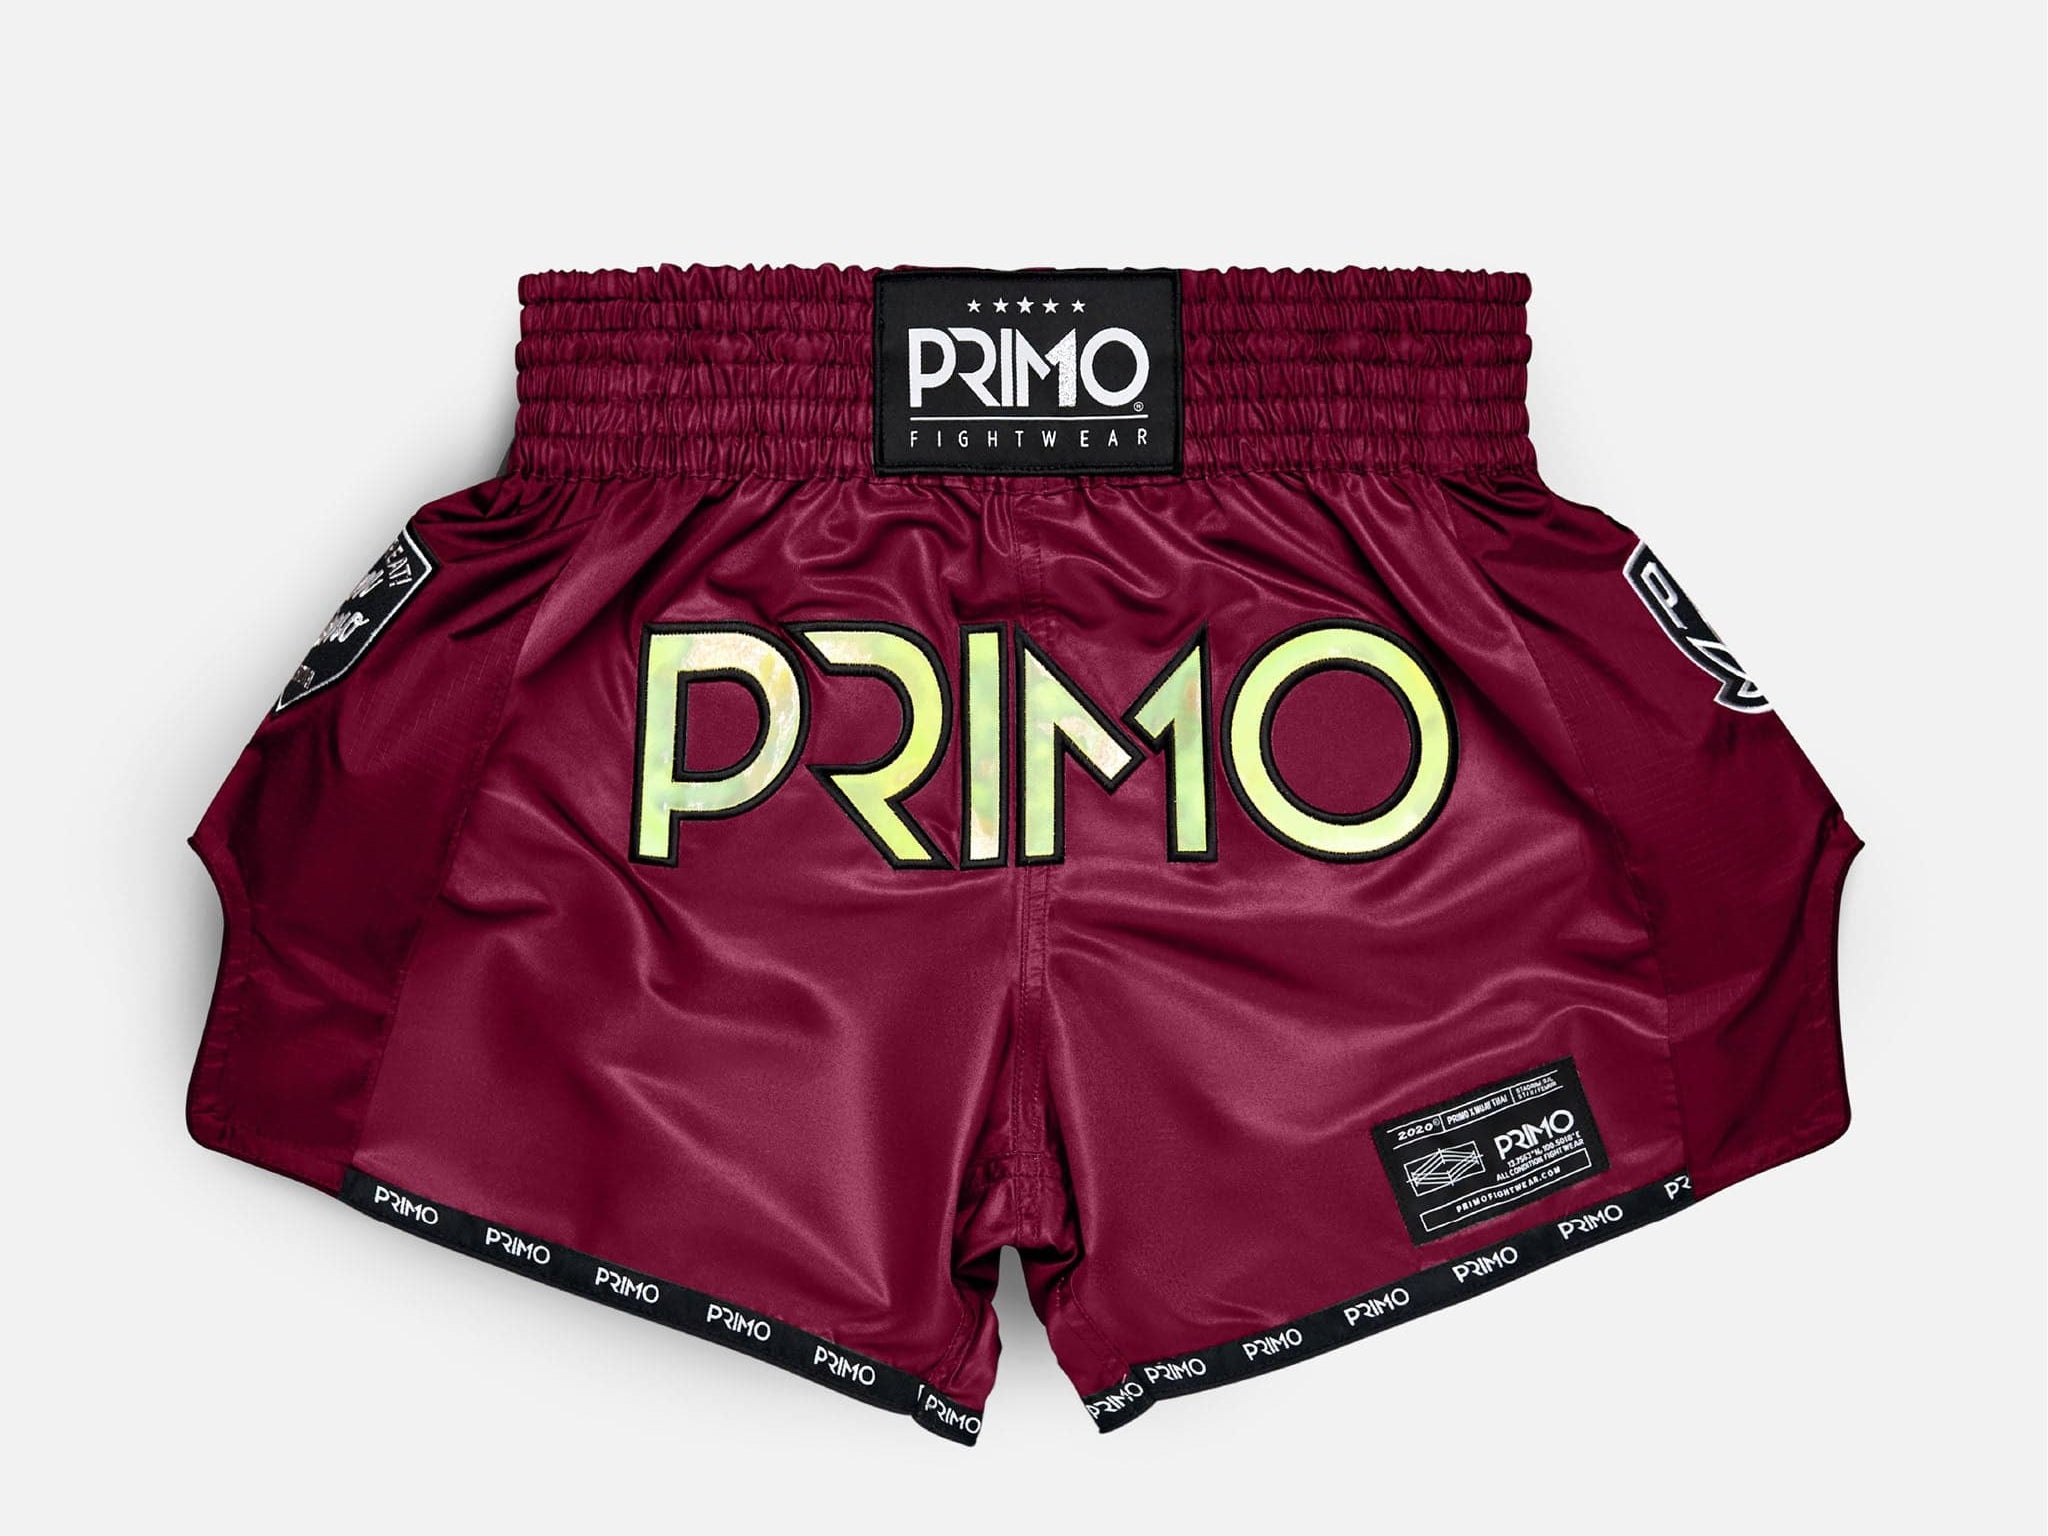 Primo Fight Wear Official Muay Thai Shorts - Hologram Series - Valor Red